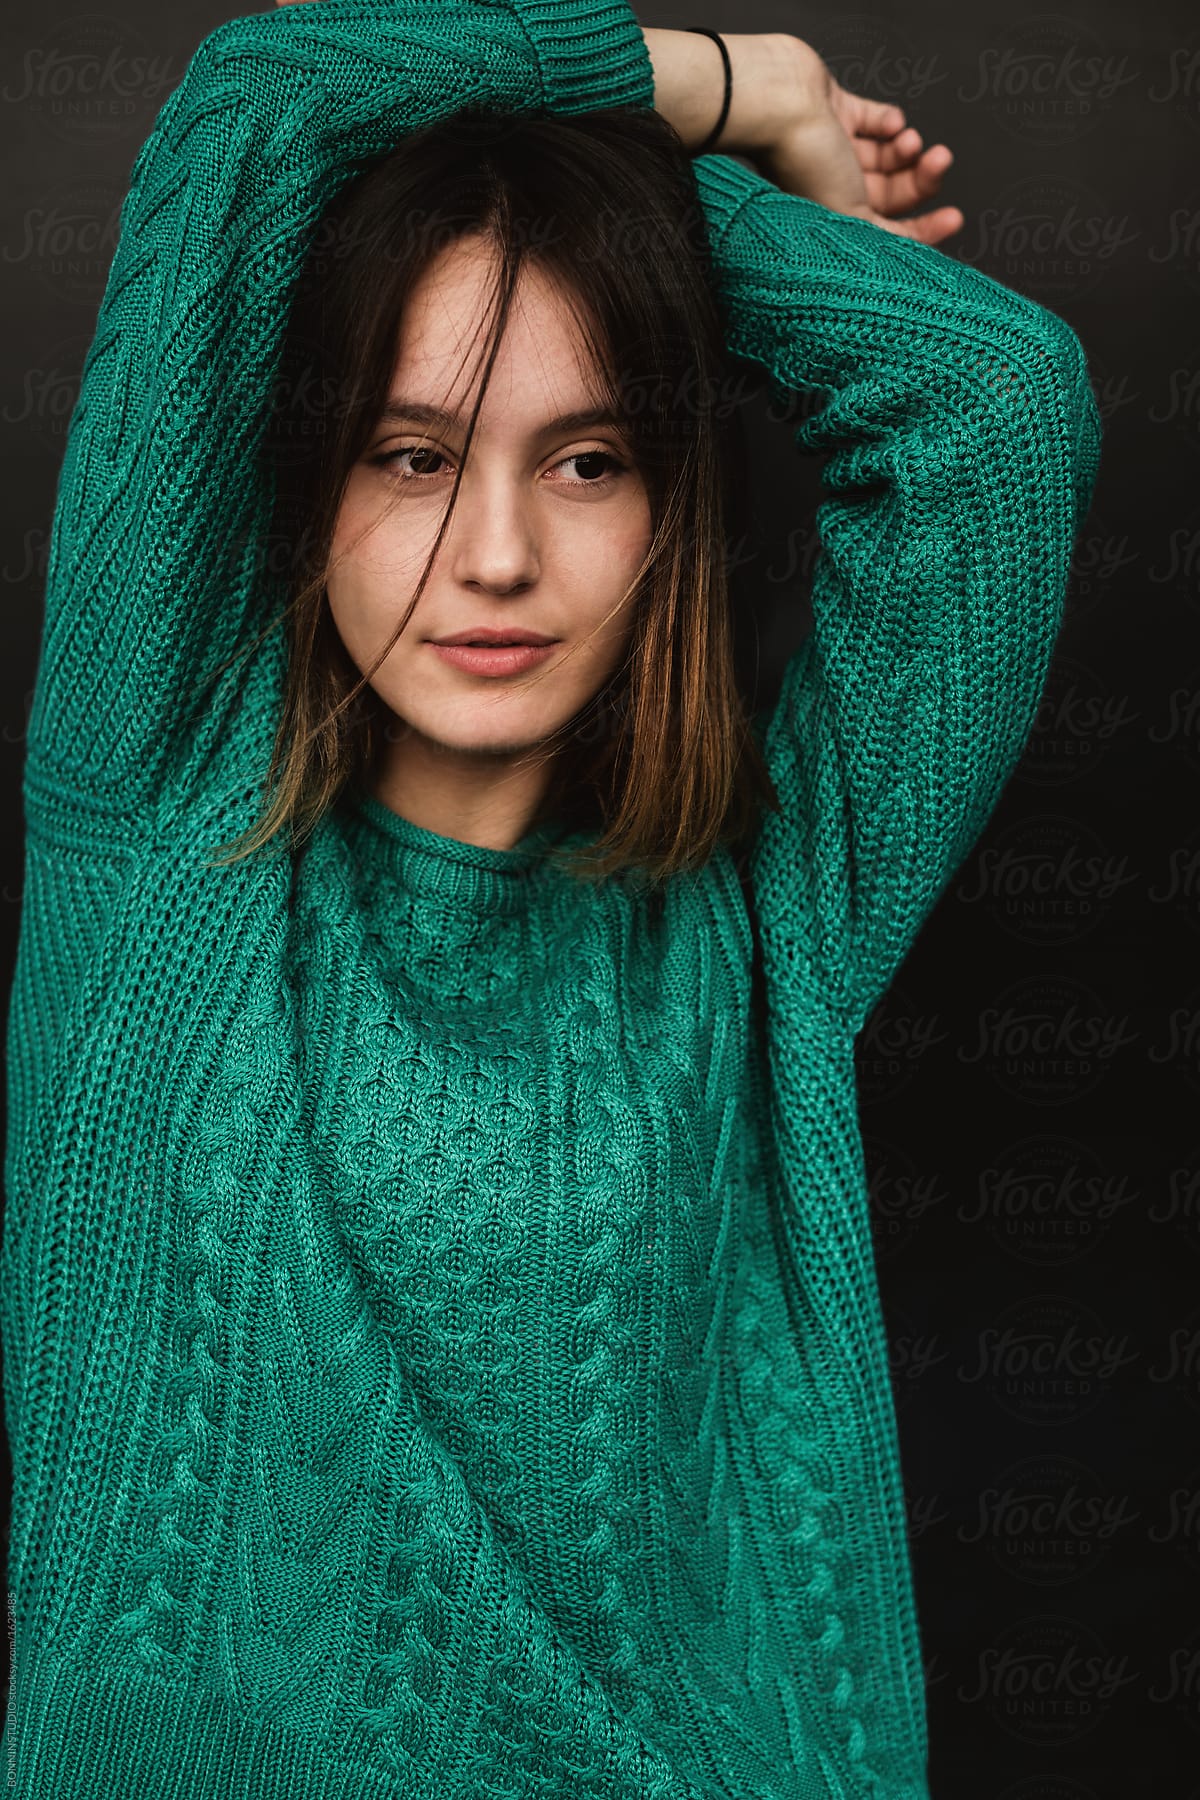 The Girl In The Green Sweater